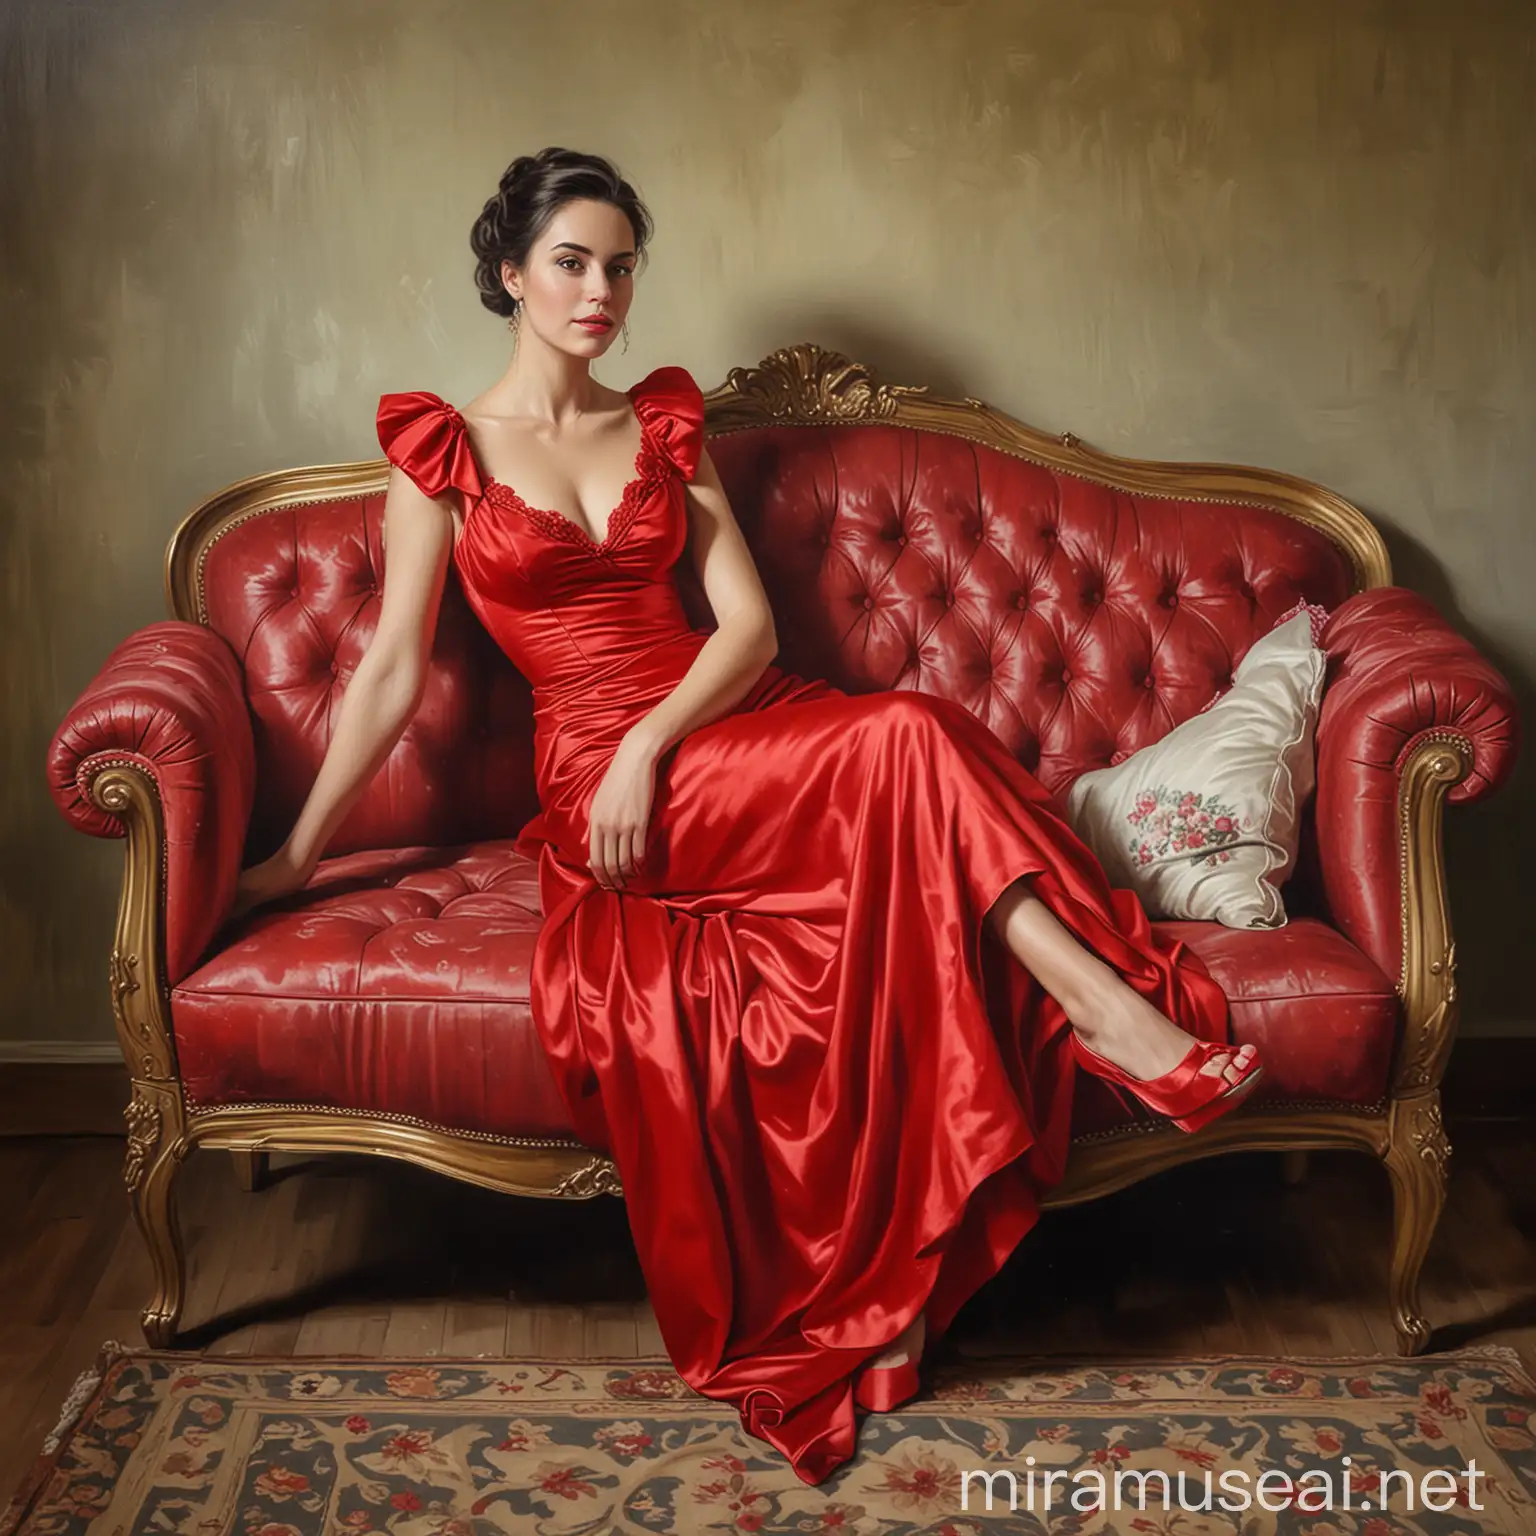 In oil painting, a lady with red dress sits on an elegant couch